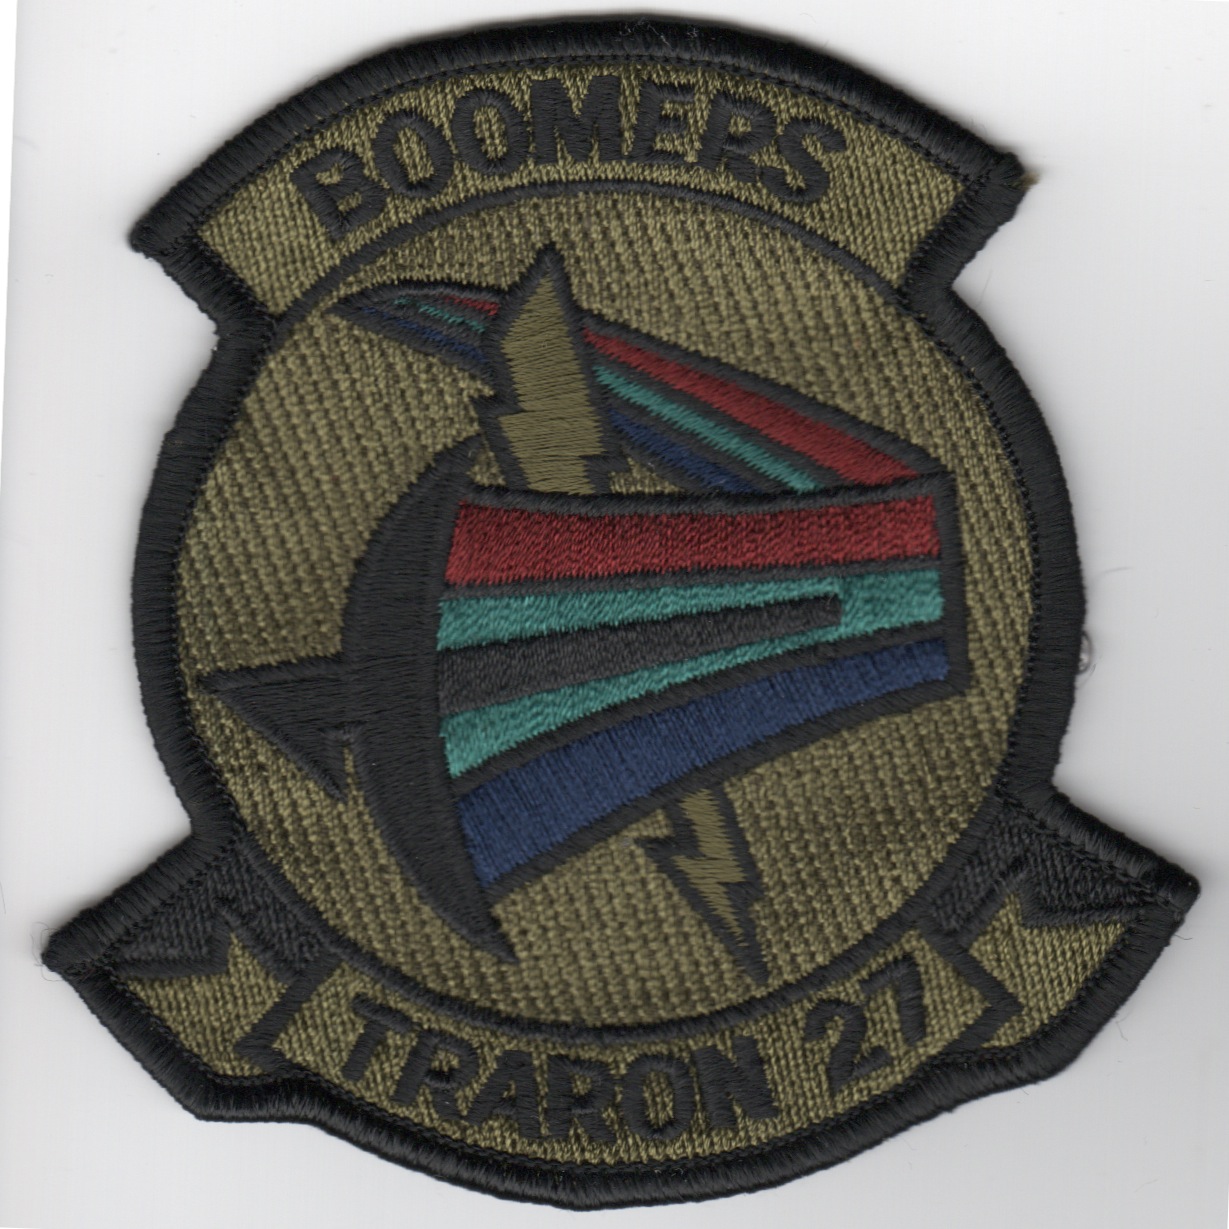 TRARON 27 BOOMERS OD GREEN STANDARD CHEST PATCH 